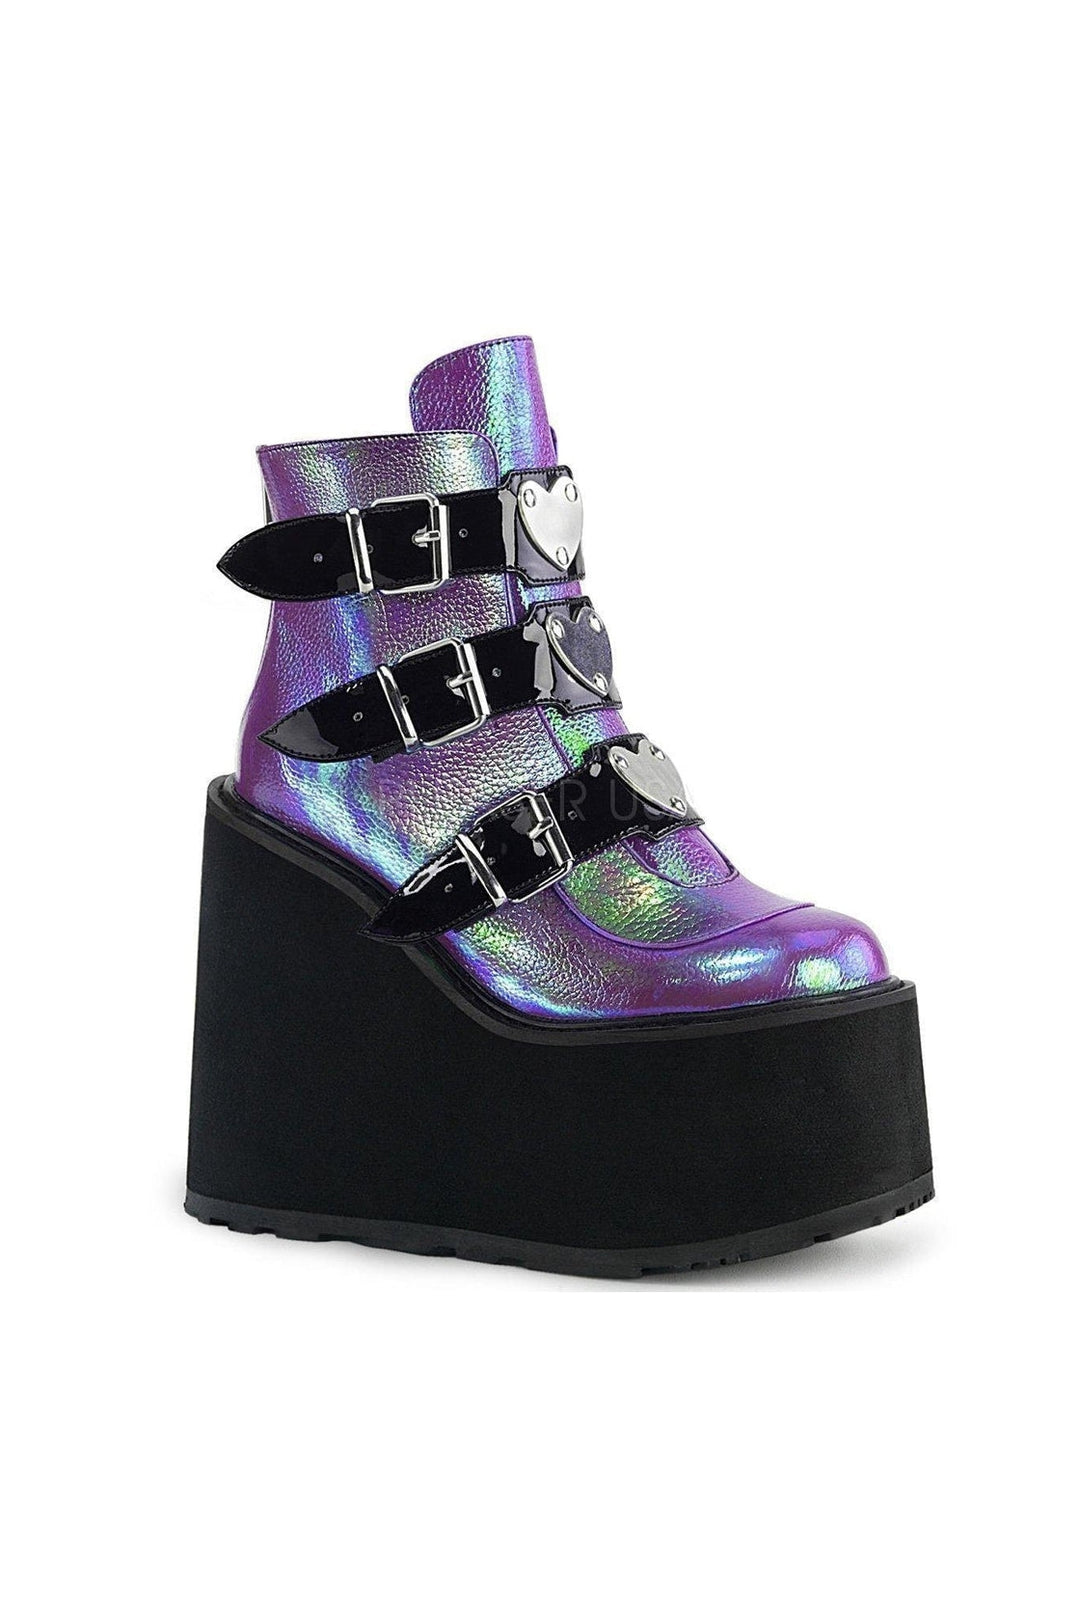 SWING-105 Demonia Ankle Boot-Demonia-SEXYSHOES.COM